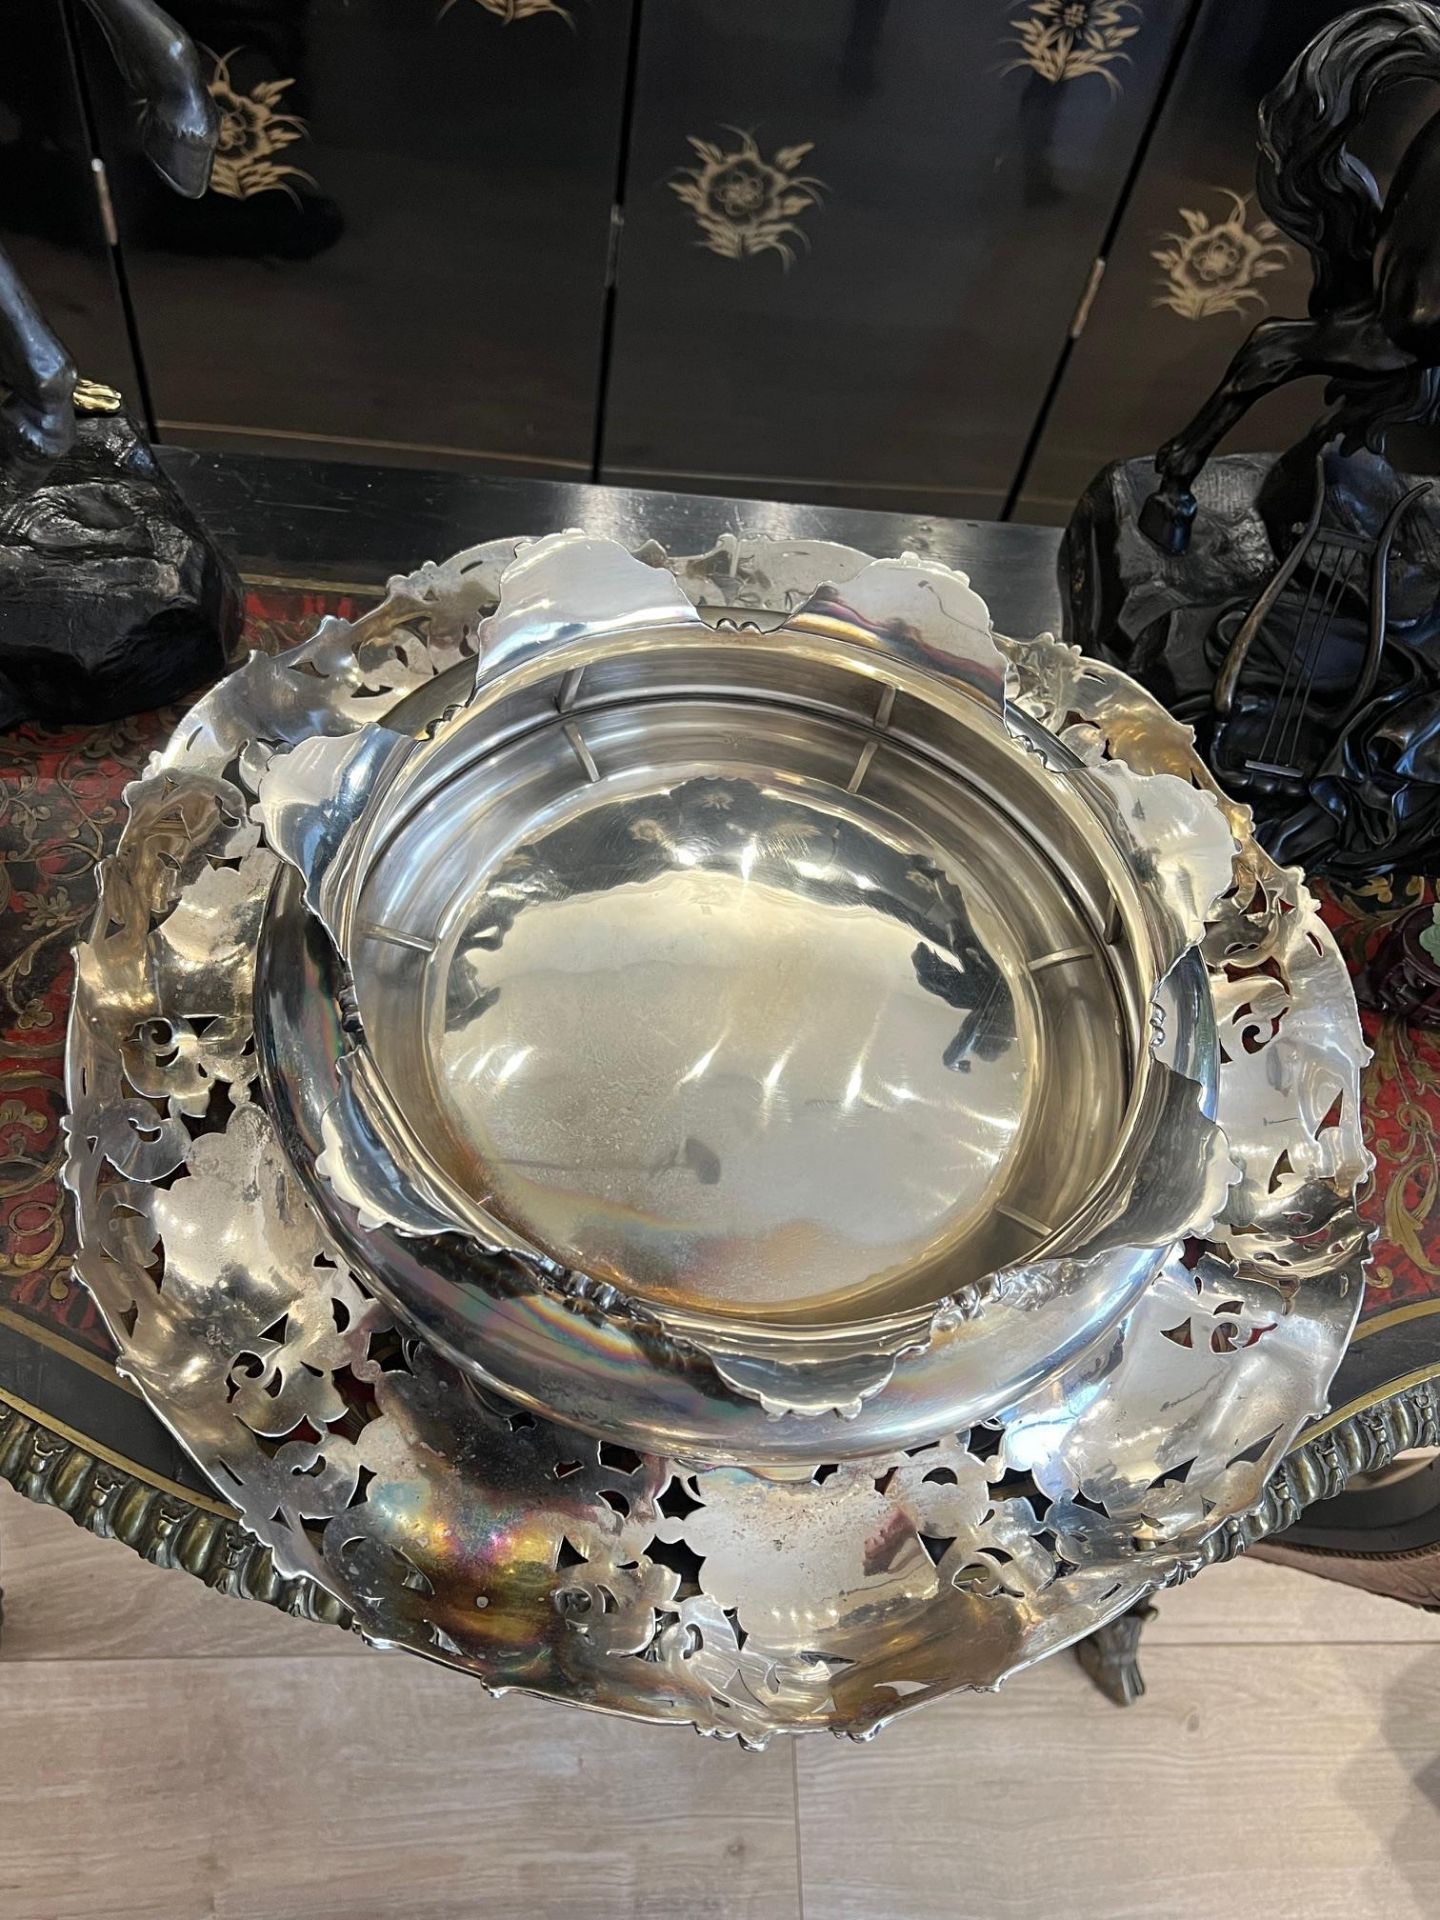 A VERY LARGE STERLING SILVER CENTREPIECE BY GORHAM, C. 1901 AMERICAN - Image 9 of 10